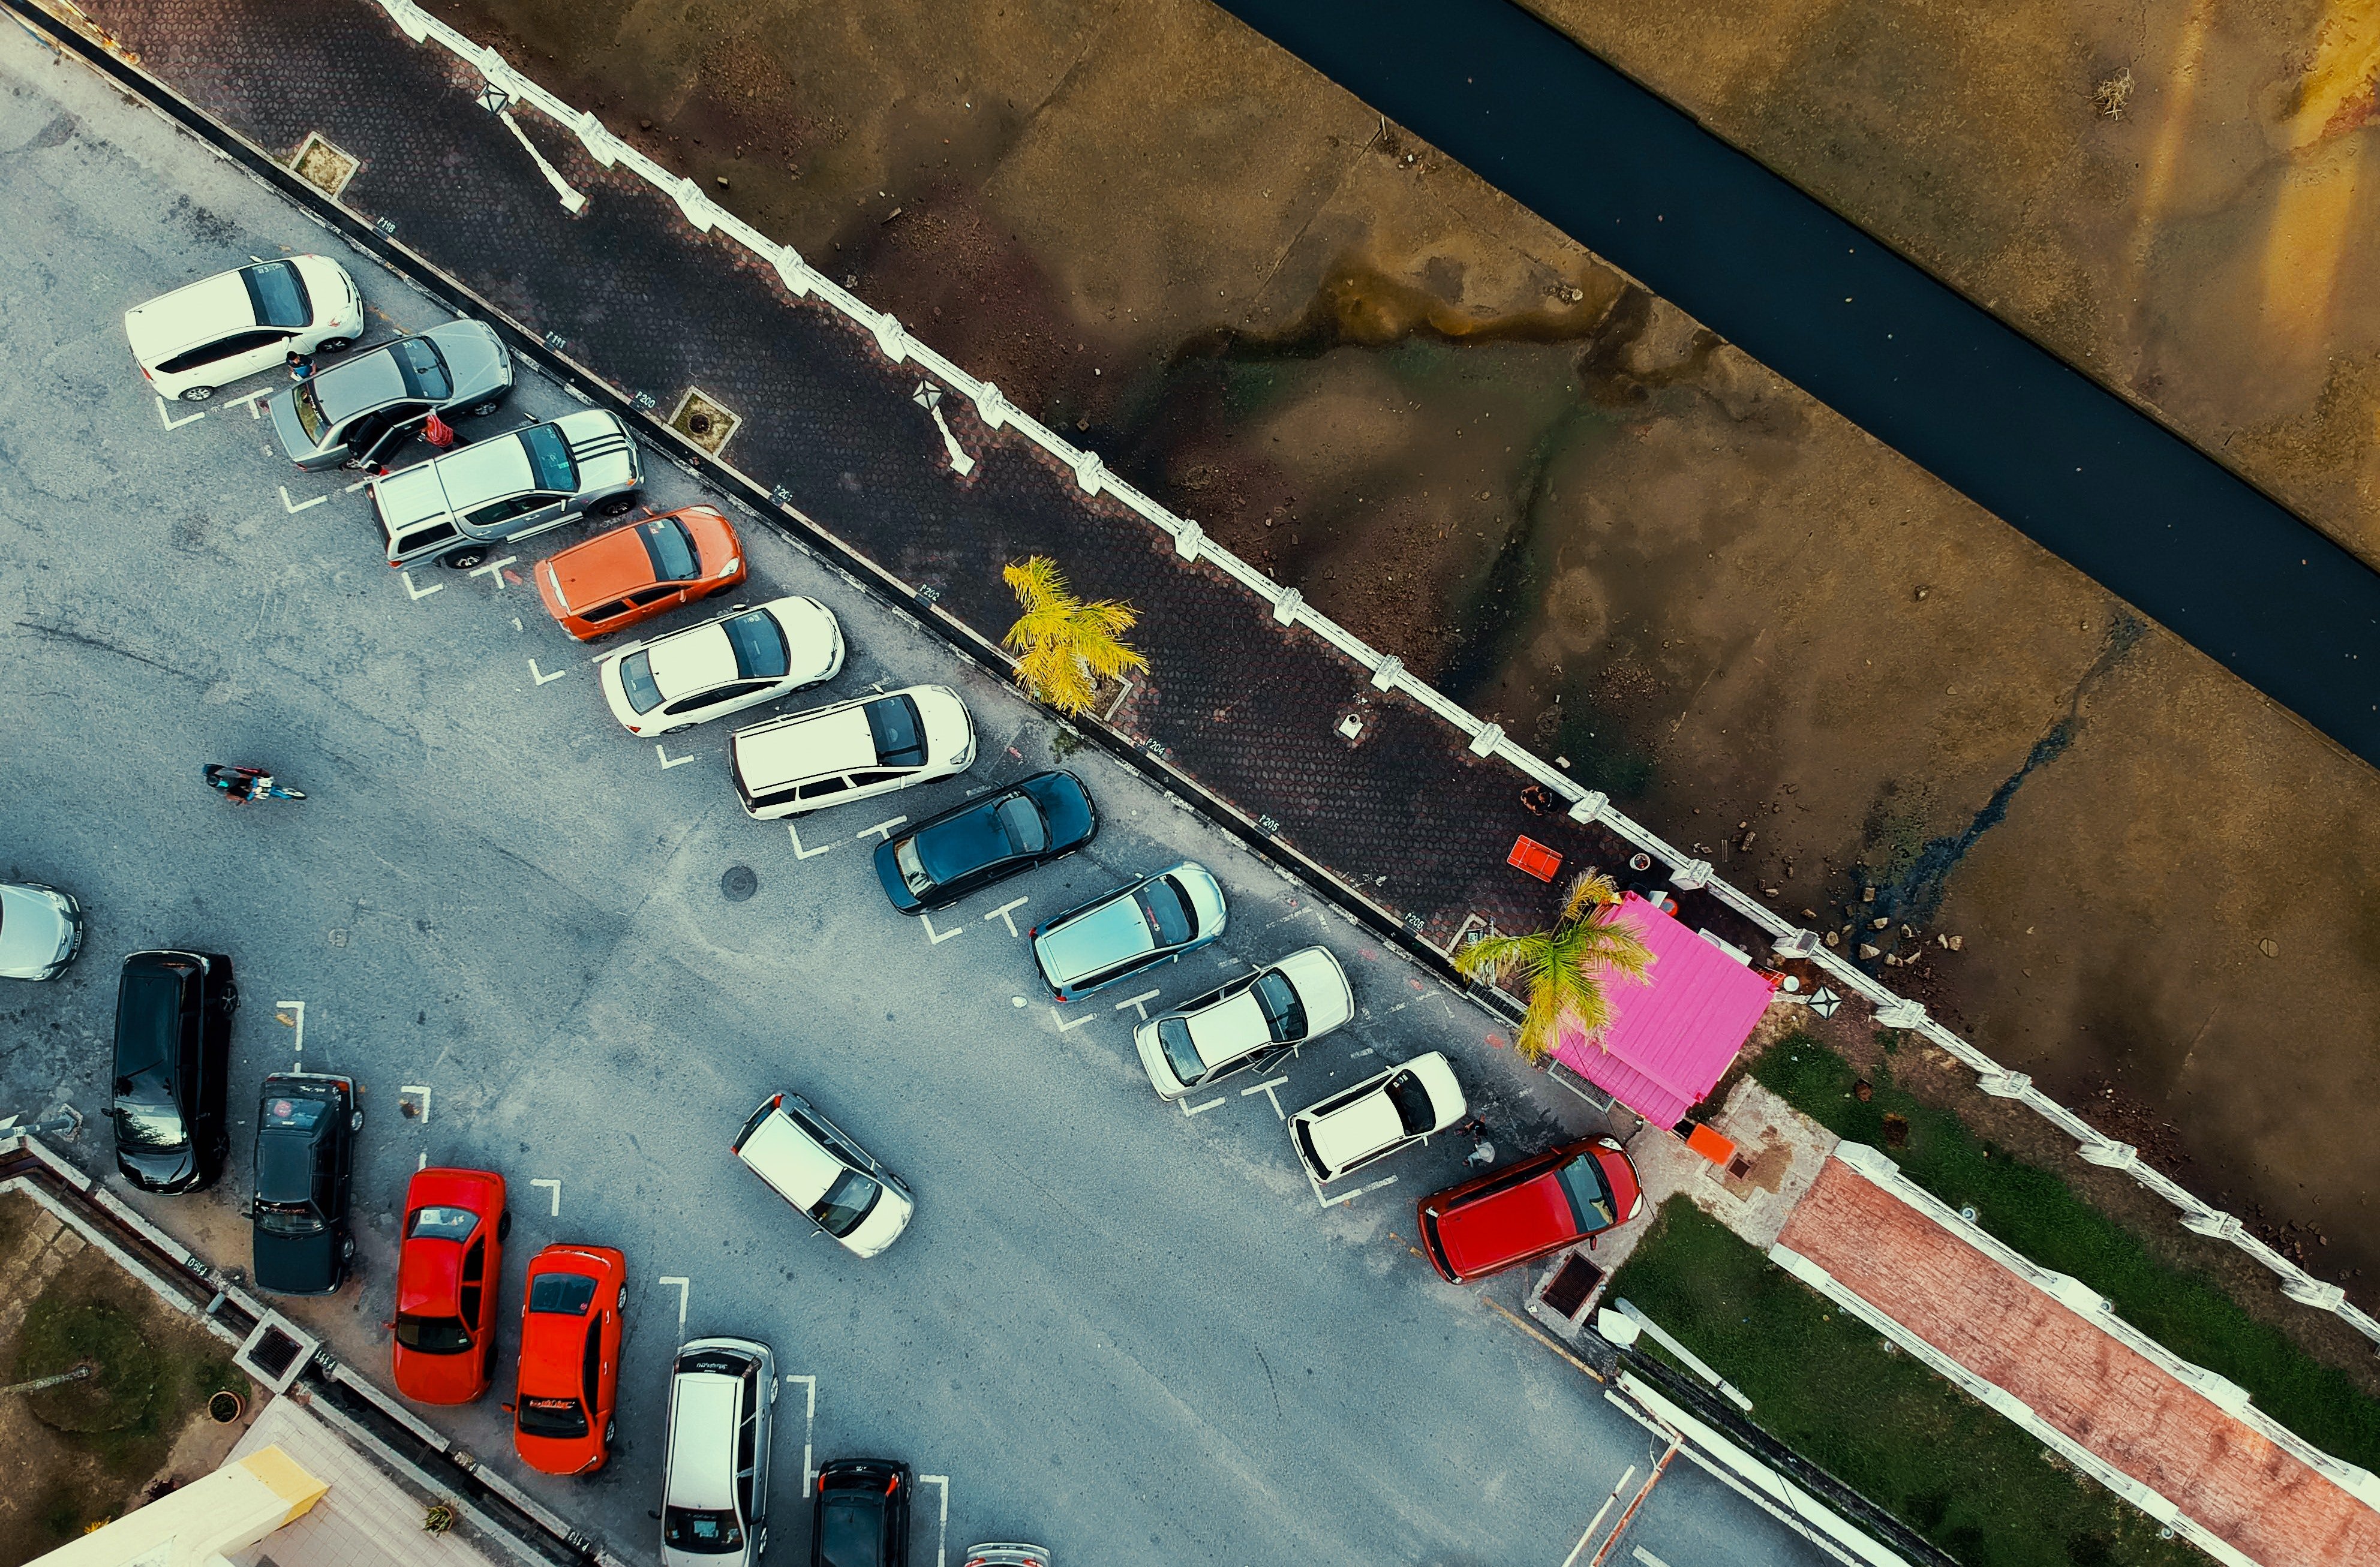 One day, Jack had an idea after seeing cars at a mall's parking lot.  |  Source: Pexels